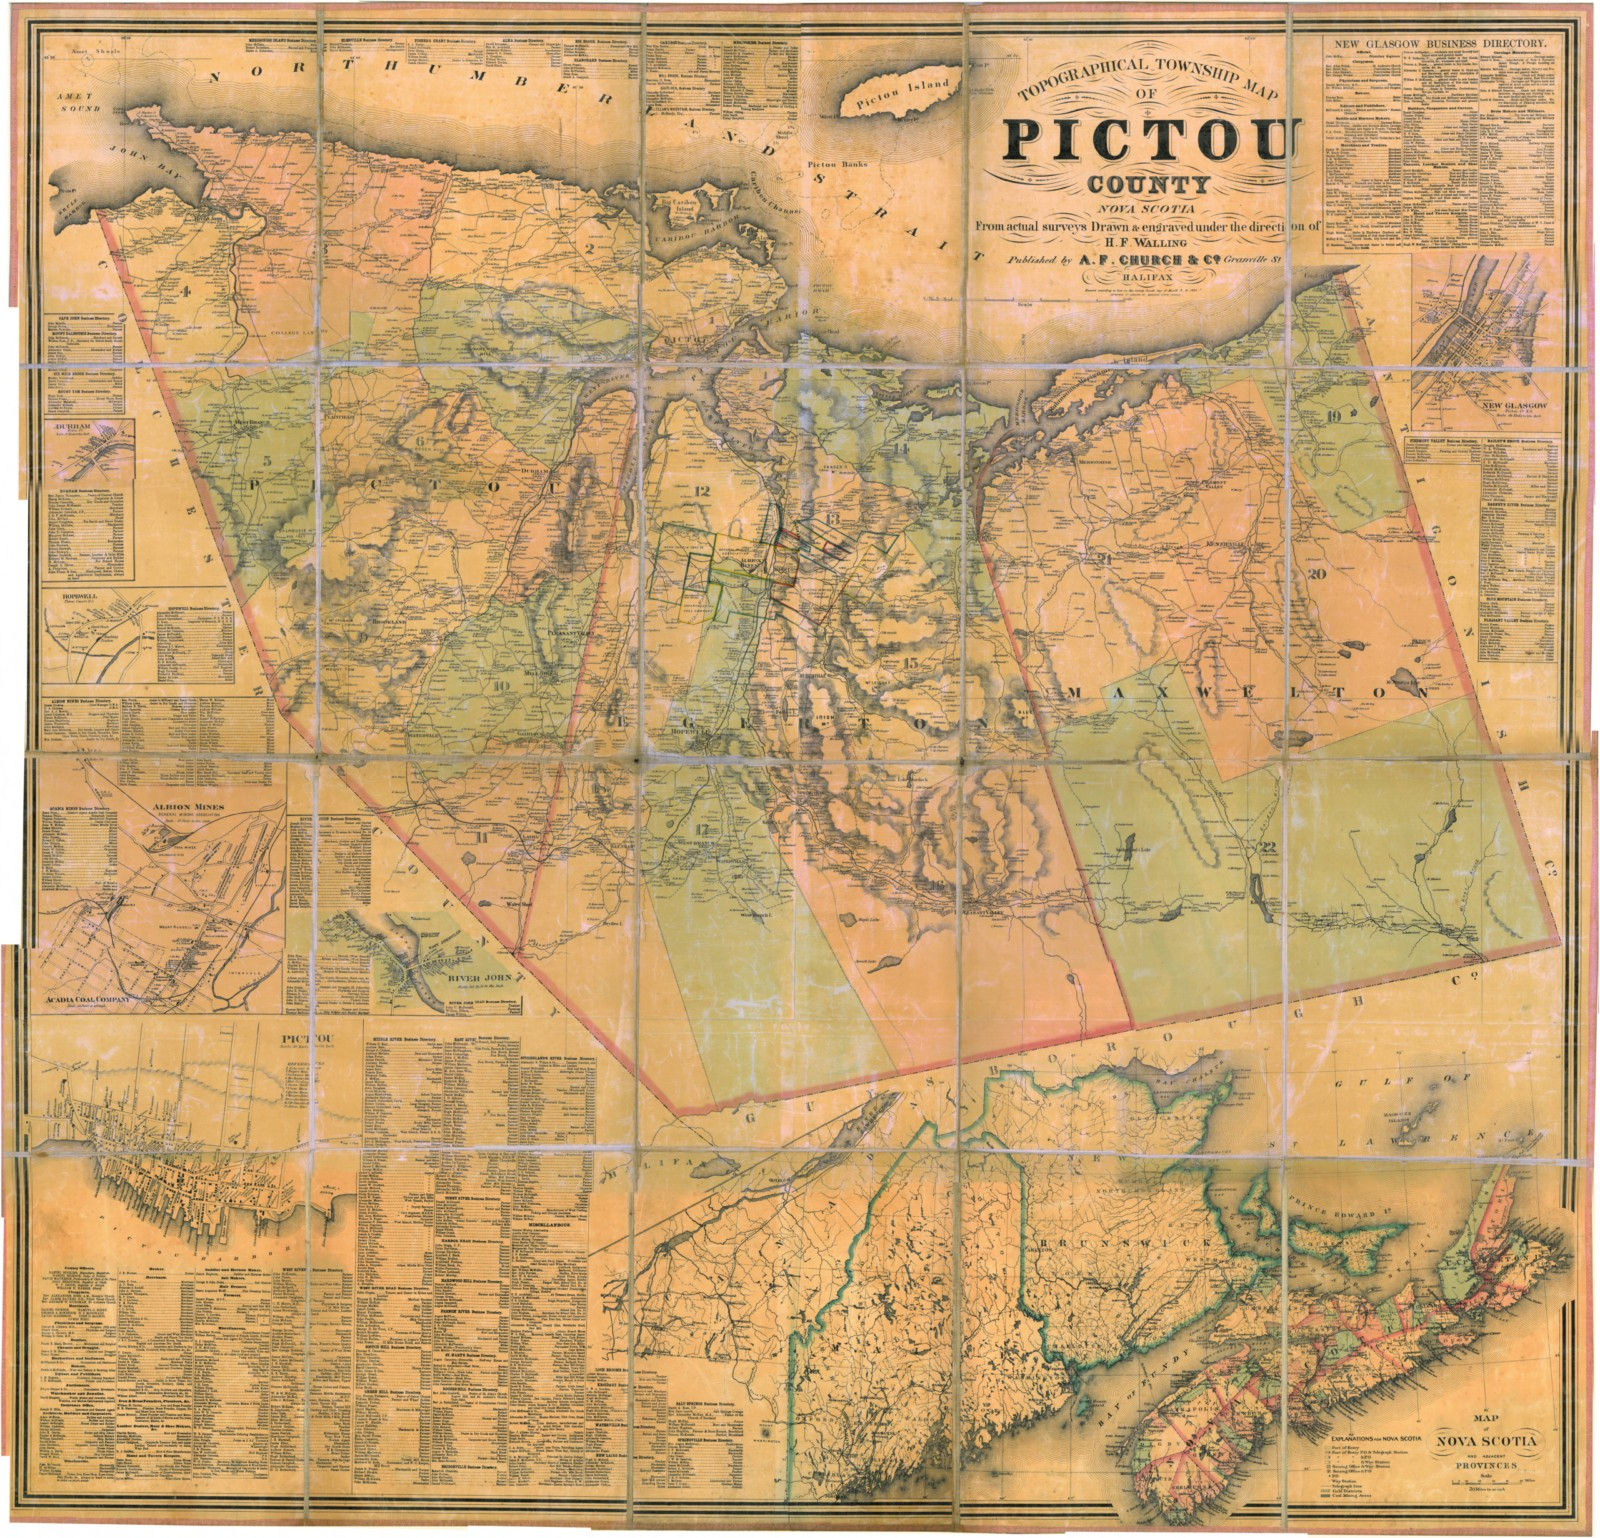 1864 Pictou County Topographical Township Map